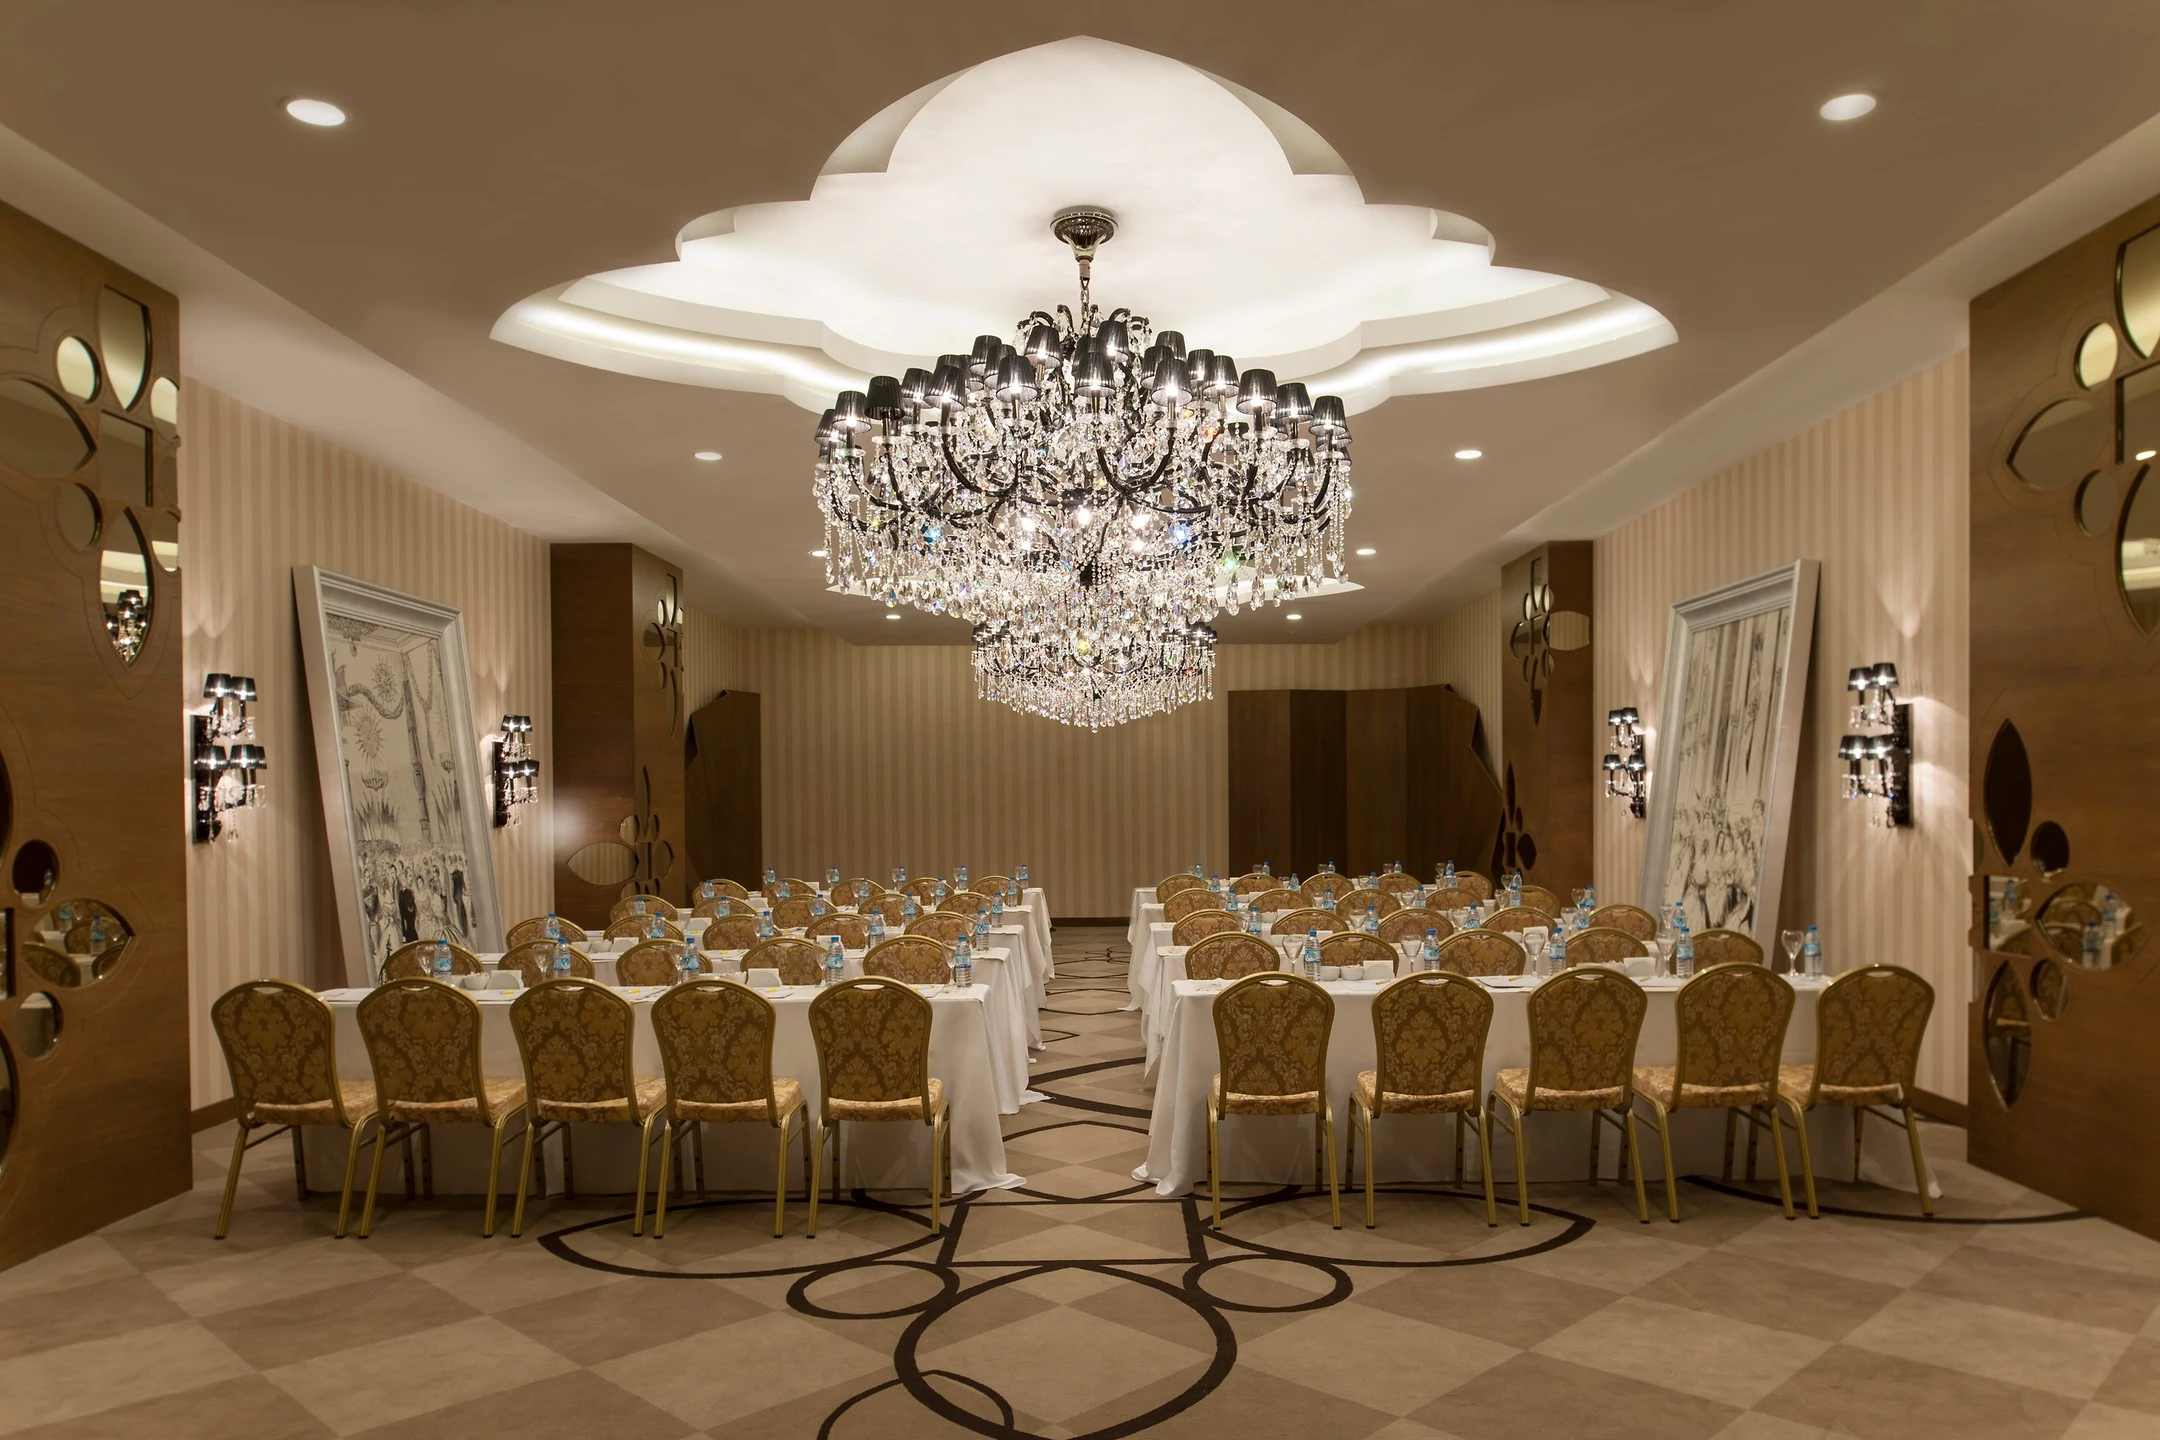 delphin-imperial-hotel-meeting-3710